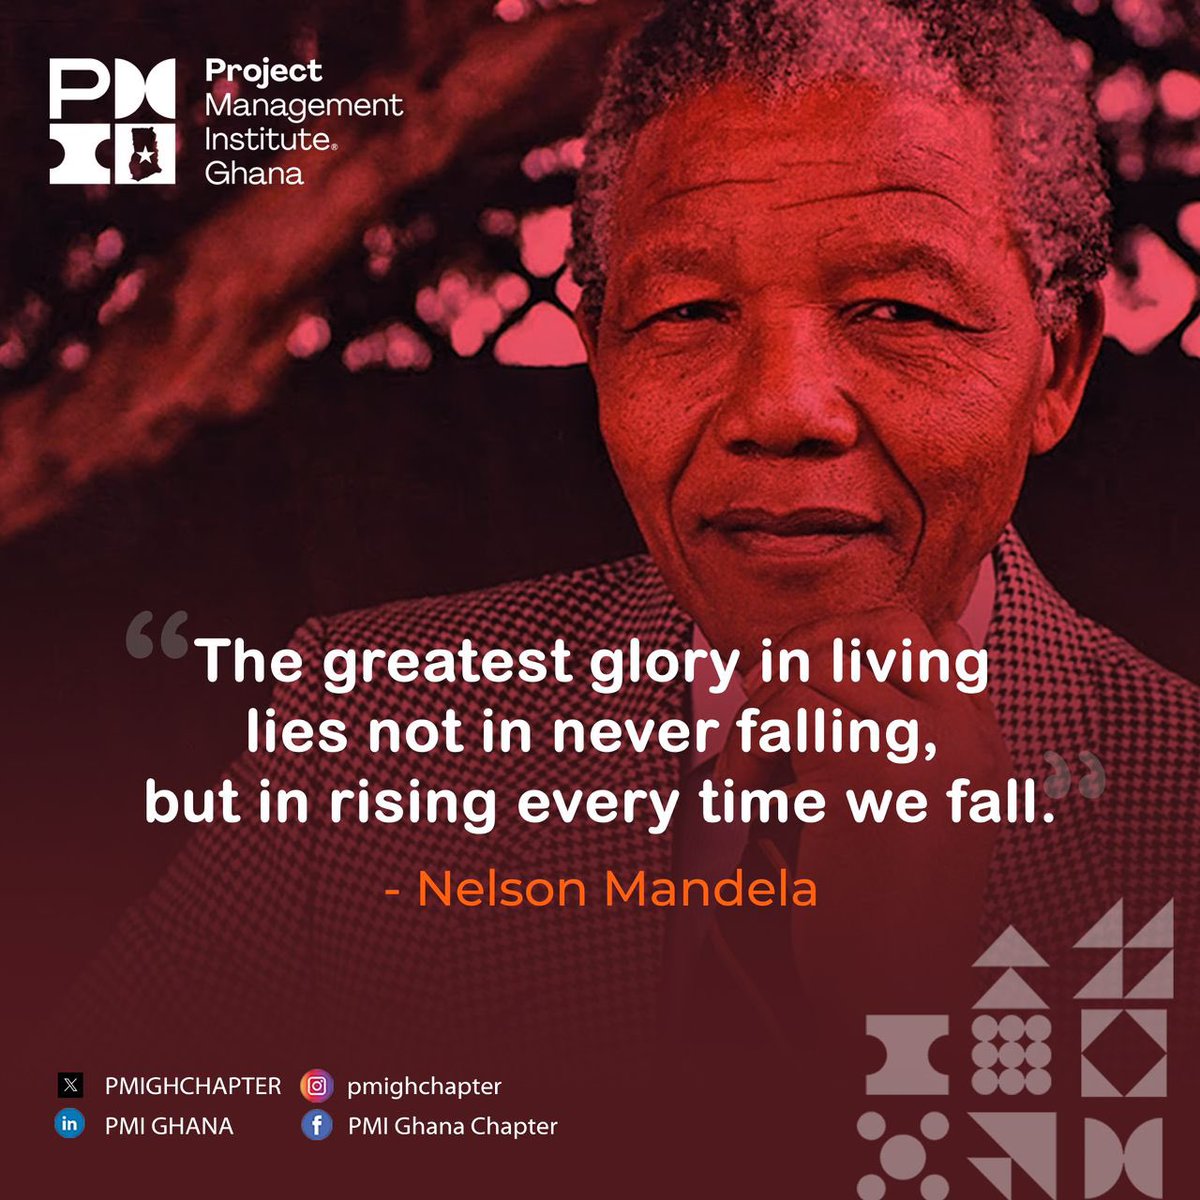 @PMIGHChapter ‘s PM Nugget for the week: We fall a thousand times, we shall rise a thousand times.
   
#PMIGhana 
#PMIGhanaChapter 
#Winning2024
#Nugget 
#Tuesdayinspiration #ProjectManagement #ProjectManager